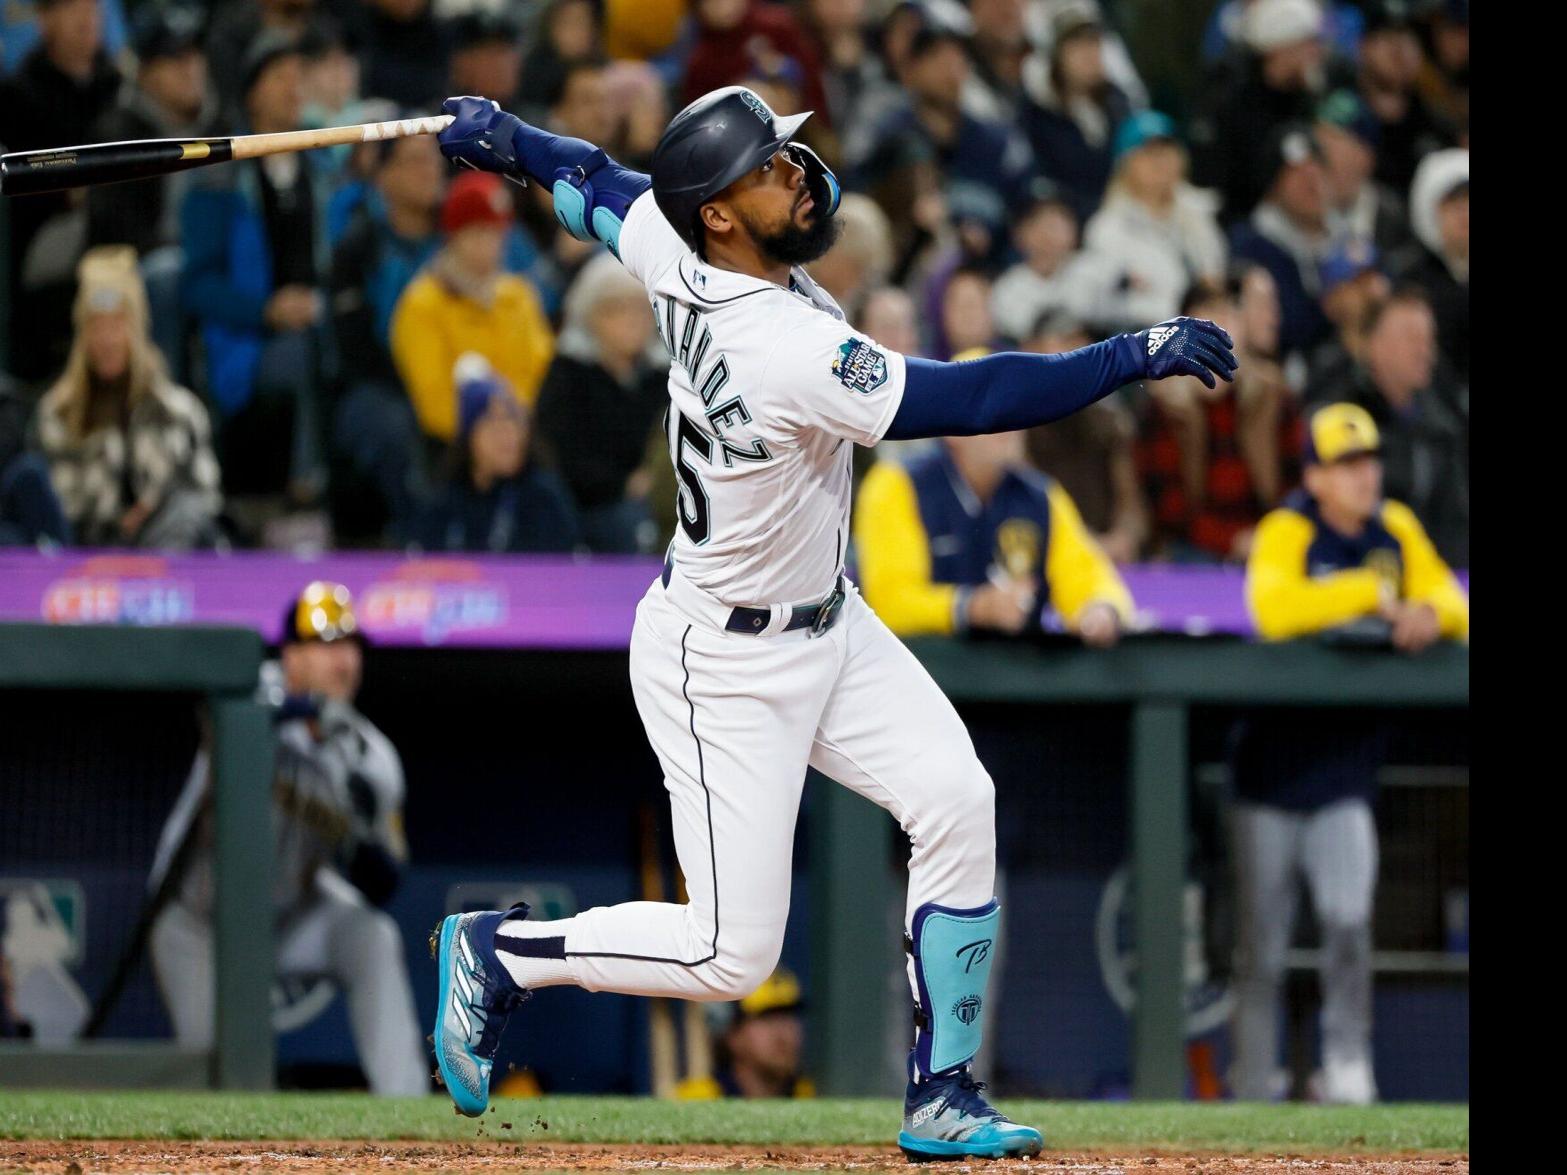 Mariners remain confident: 'Our mindset is just trying to get to